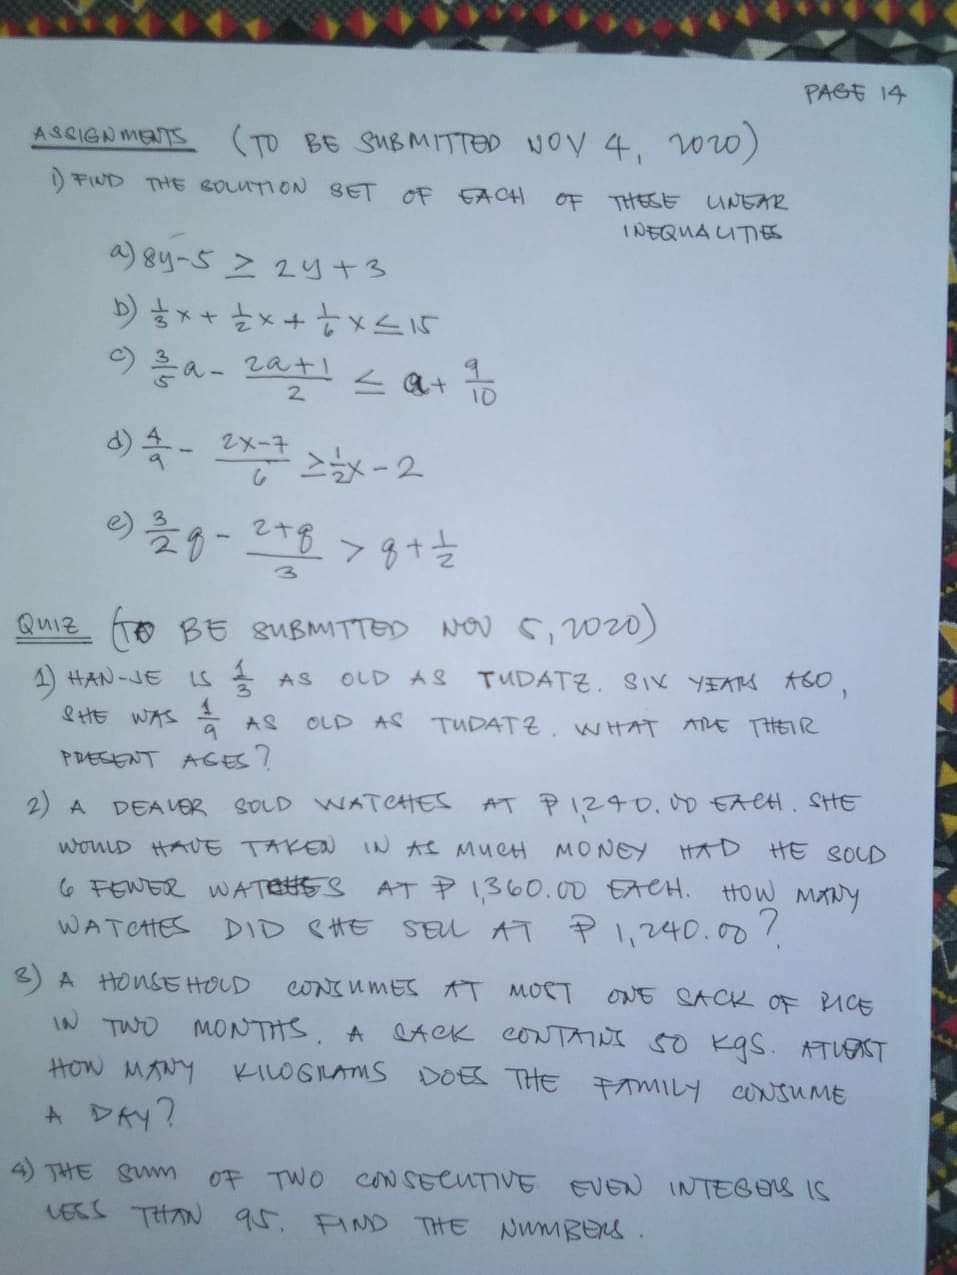 PAGE 14
ASSIGNMETS
(TO BE SUBMITTED NOV 4, ww)
) FIND THE BOLUTION SET OF EACH
OF THESE
UNEAR
INEQUA UTIES
a) 8y-5 z 2y+3
9a- zatl <at
2.
10
d) - 2x-7
3)
Quiz To BE gUBMITTED Nou s, 2w20)
1 HAN-JE
&HE WAS a
OLD AS
TUDATZ. SIK YEAS ASO,
LS
AS
AS
OLD AS TUDATZ. W HAT
ARE THEIR
PRESENT AGES?
2) A
SOLD WAT CHES
AT PIZ40.,00 EACH. SHE
DEA VER
wouLD HAUE TAKEN
IN AS MUCH MONEY HAD
HE SOLD
6 FEWER WATESS AT P1360.00 EACH. HOW MANY
WATCHES DID SHE SEL AT PI,240.00%
A HONSEHOLD
CONTUMES AT MOCT
ONE SACK OF ICE
IN TWO MONTHS. A LAek CONTAINI 5O kas. ATUONT
KILOGIAMS DOES THE MILY CONSUME
How MANY
A DAY?
4 THE SWm
OF TWO CoN SECUTIVE EVEN INTEGES IS
LEES THAN 95. FIND THE NWMBENS.
